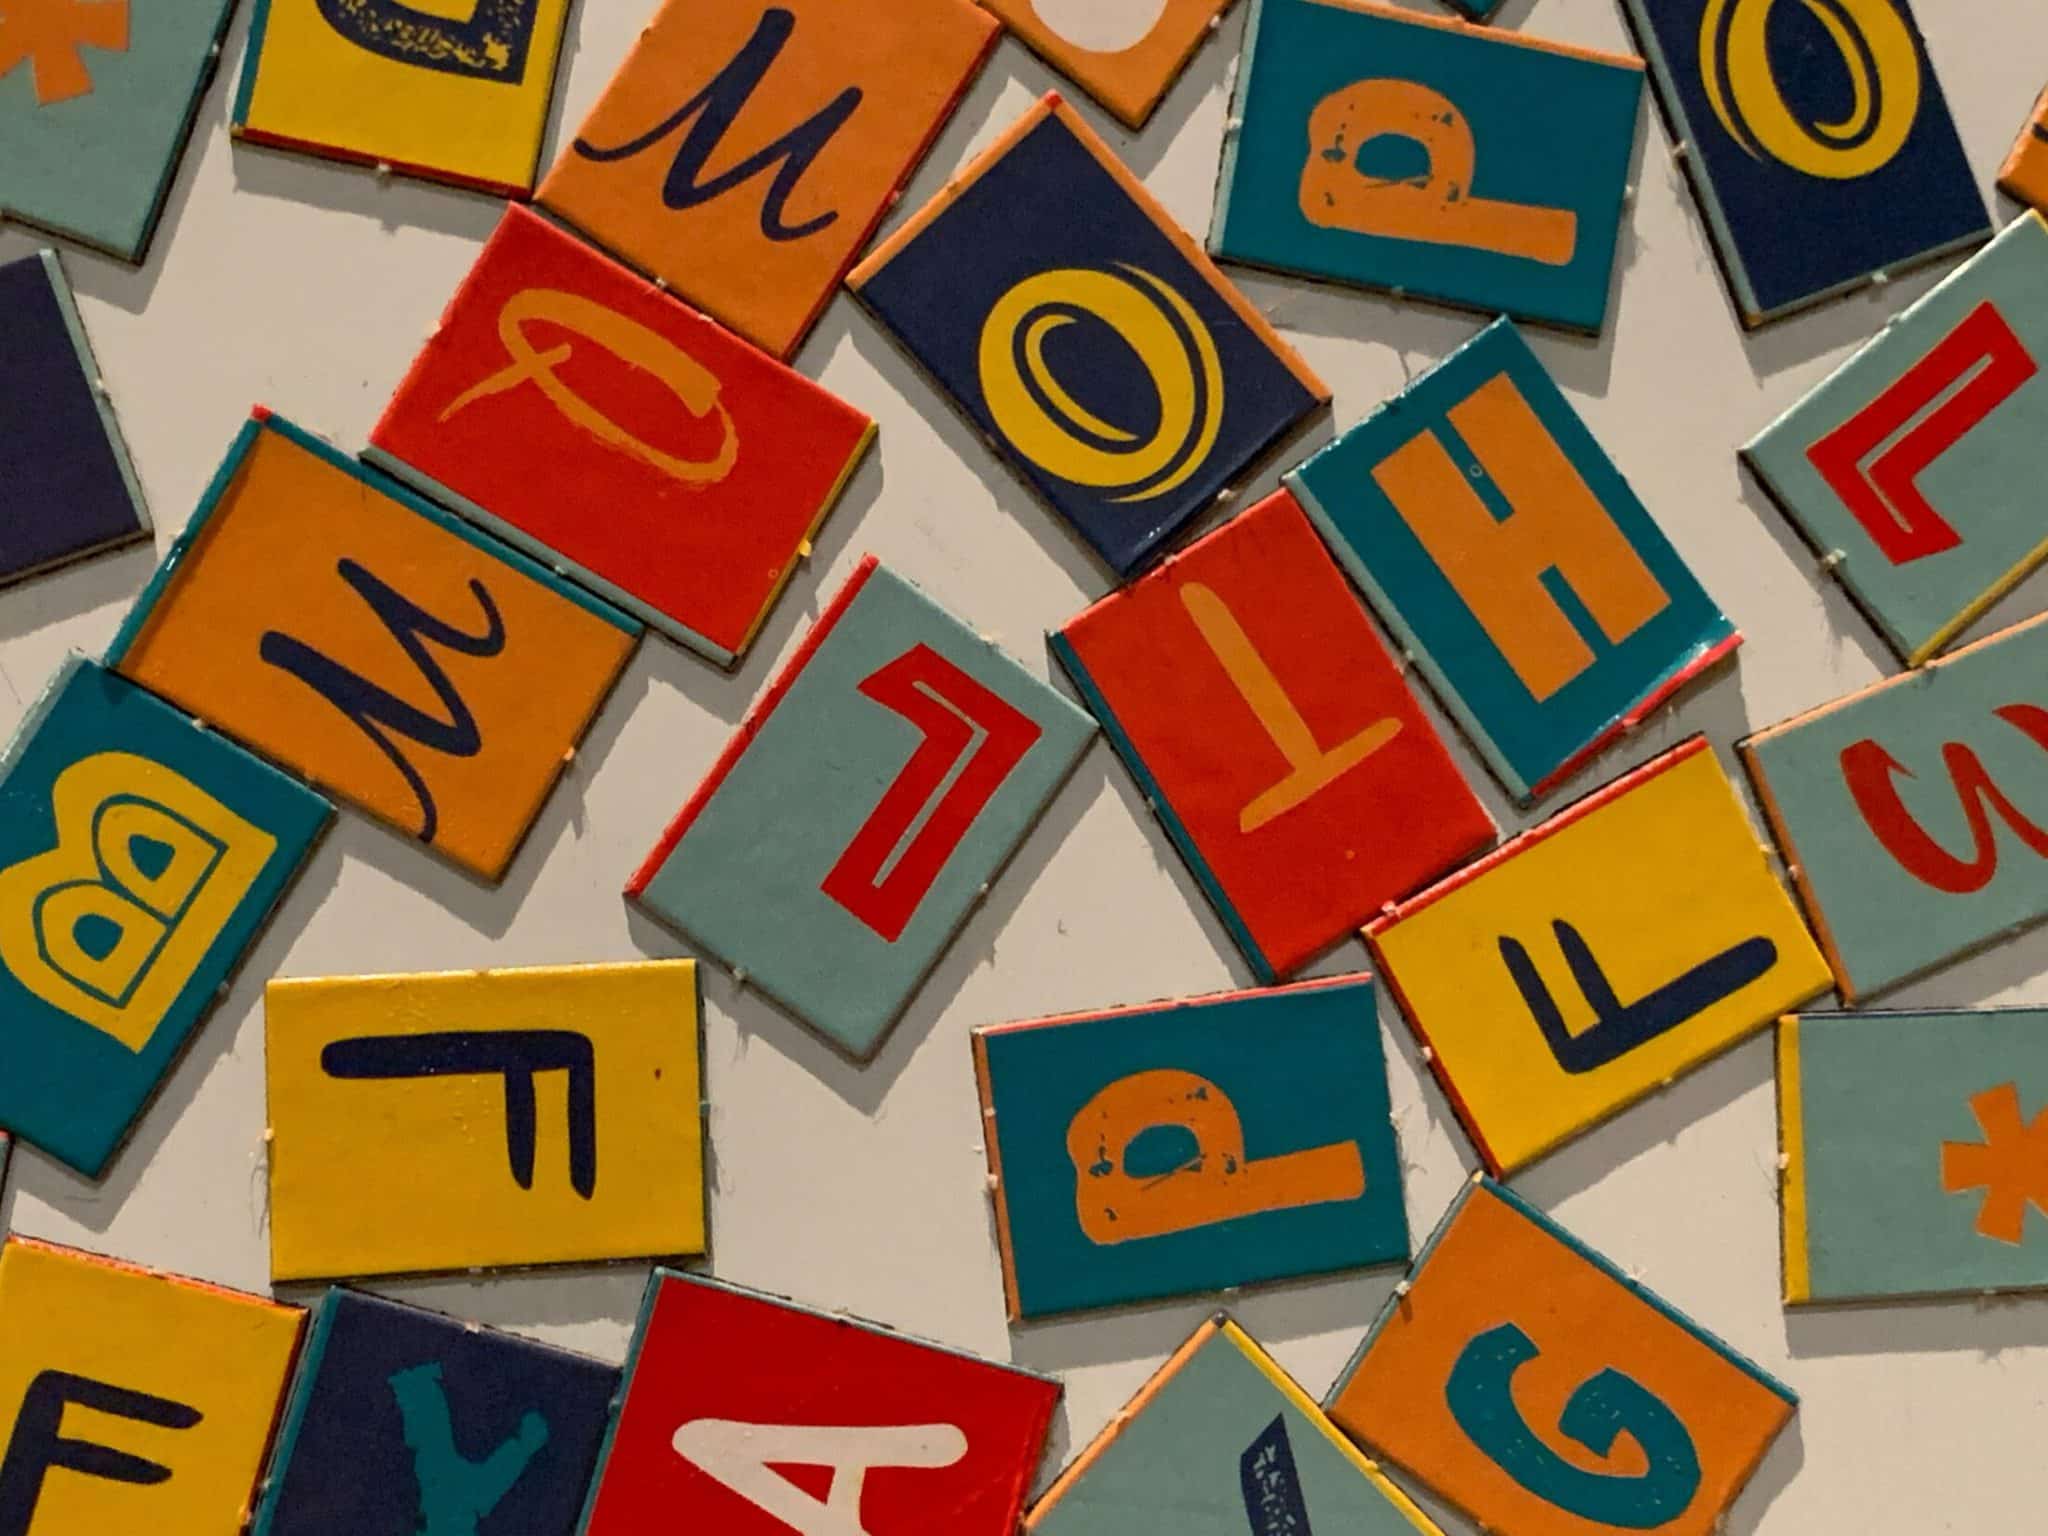 Colourful letters scattered